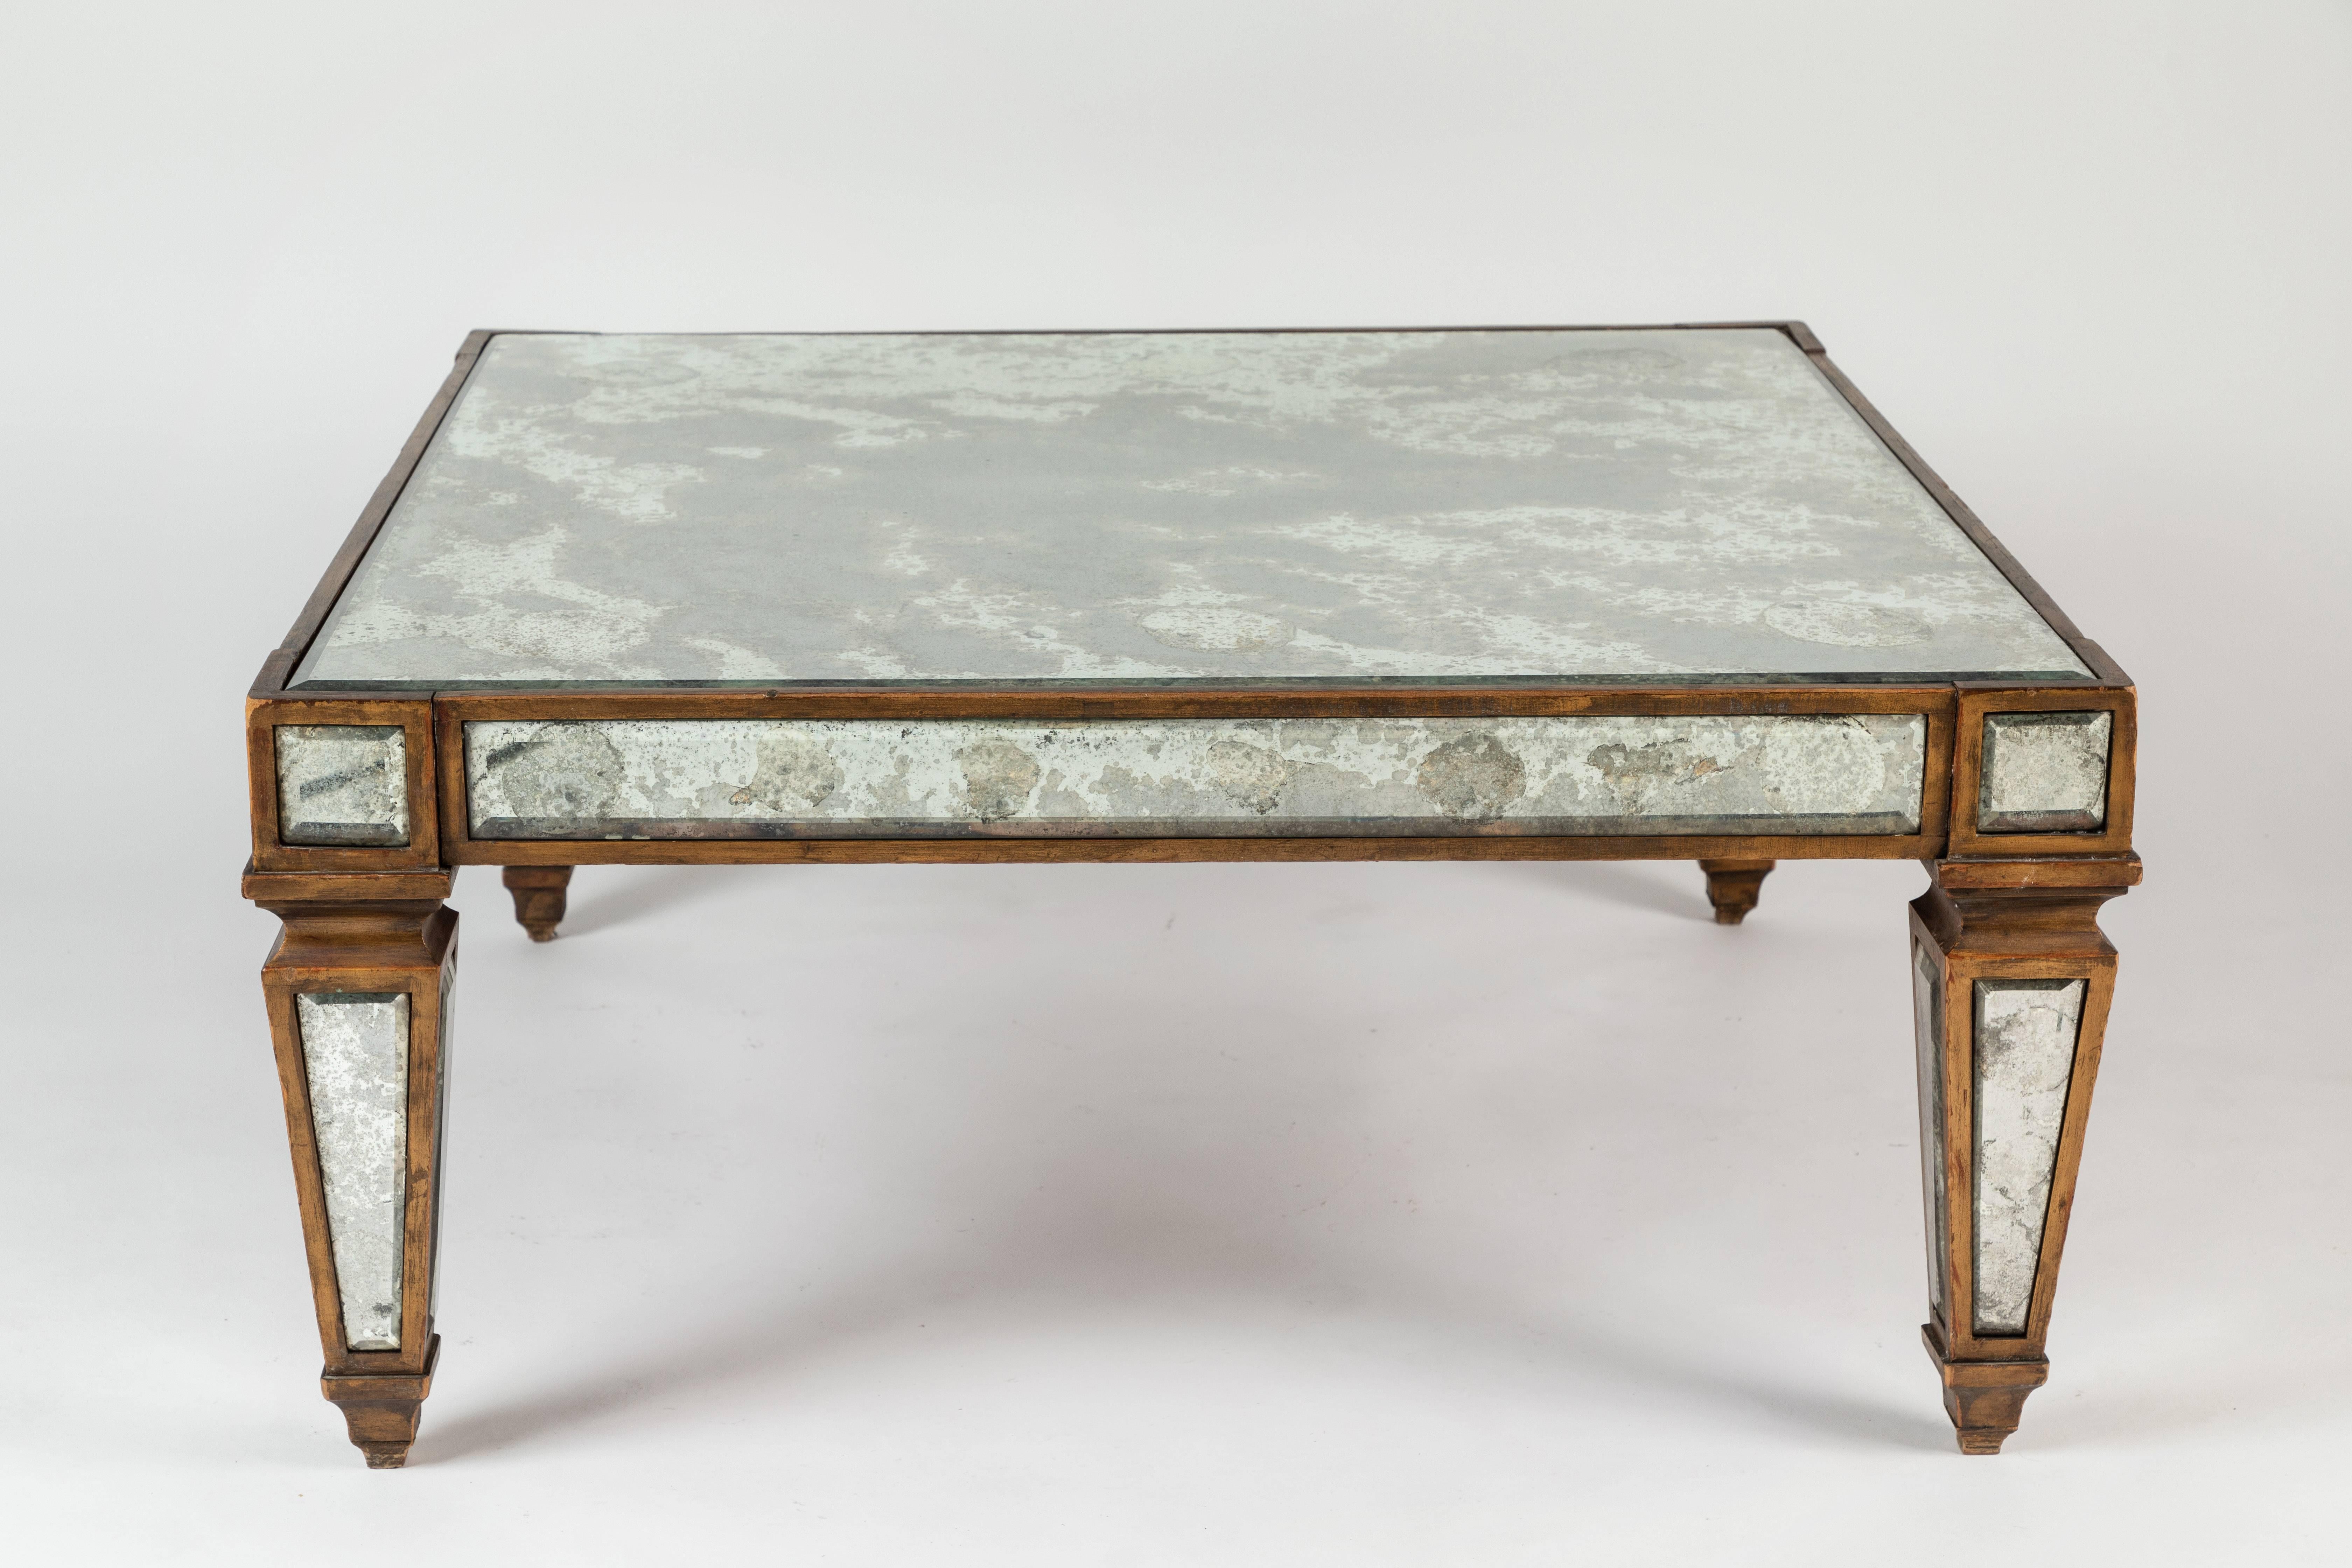 A hard to find “sick” antique mirrored cocktail table with a gold leafed wooden structure inlaid with antiqued mirror. A great square shape.